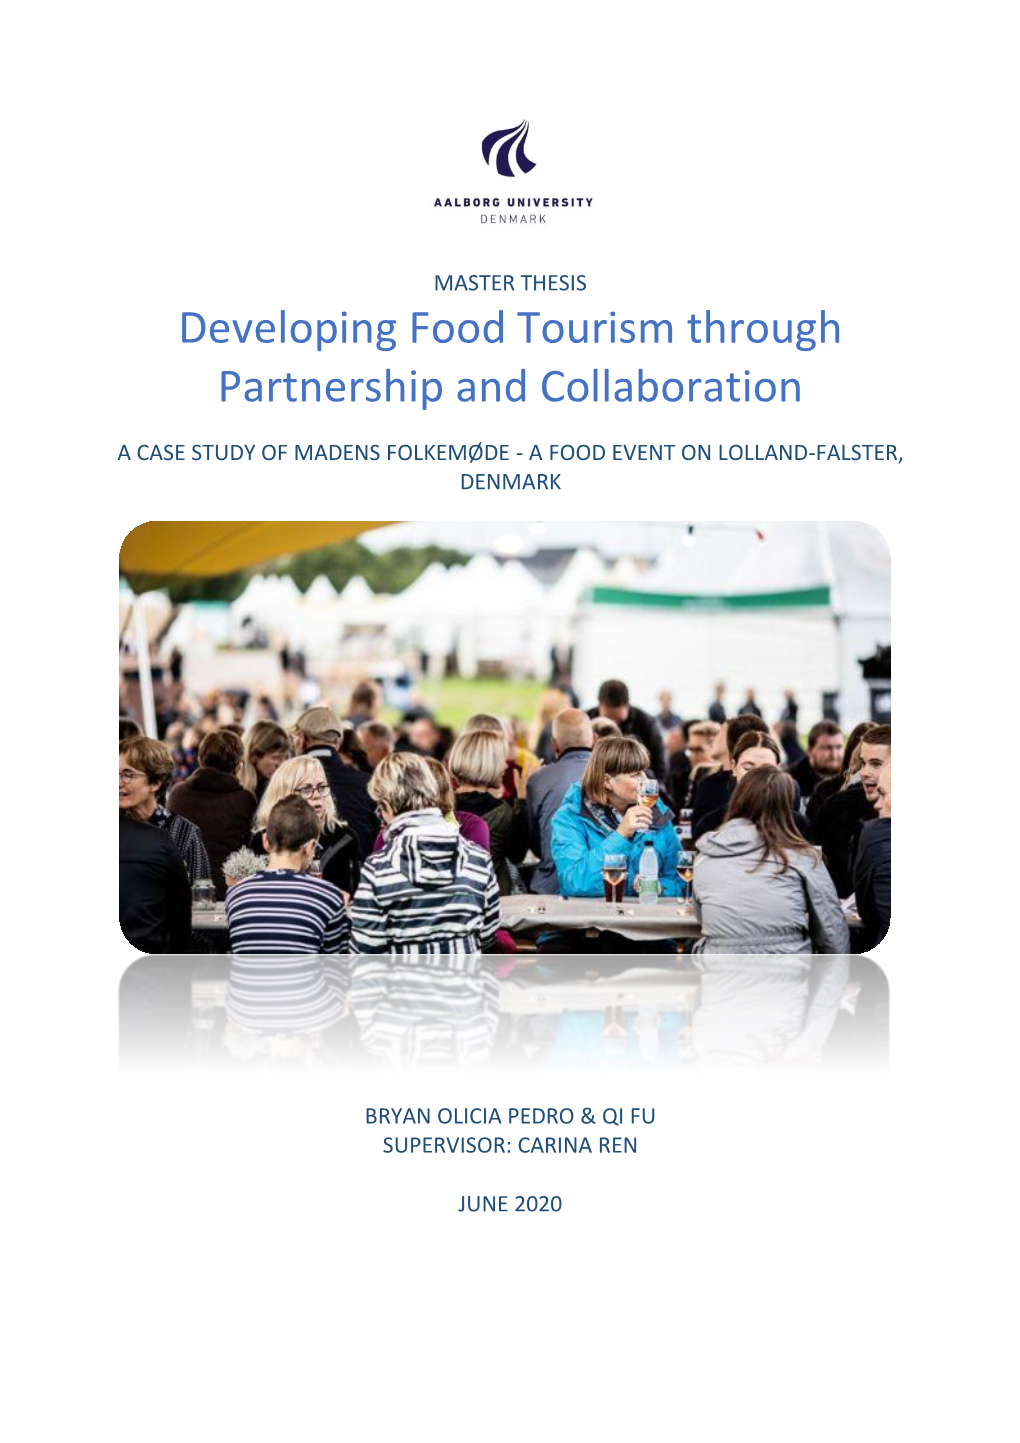 Developing Food Tourism Through Partnership and Collaboration